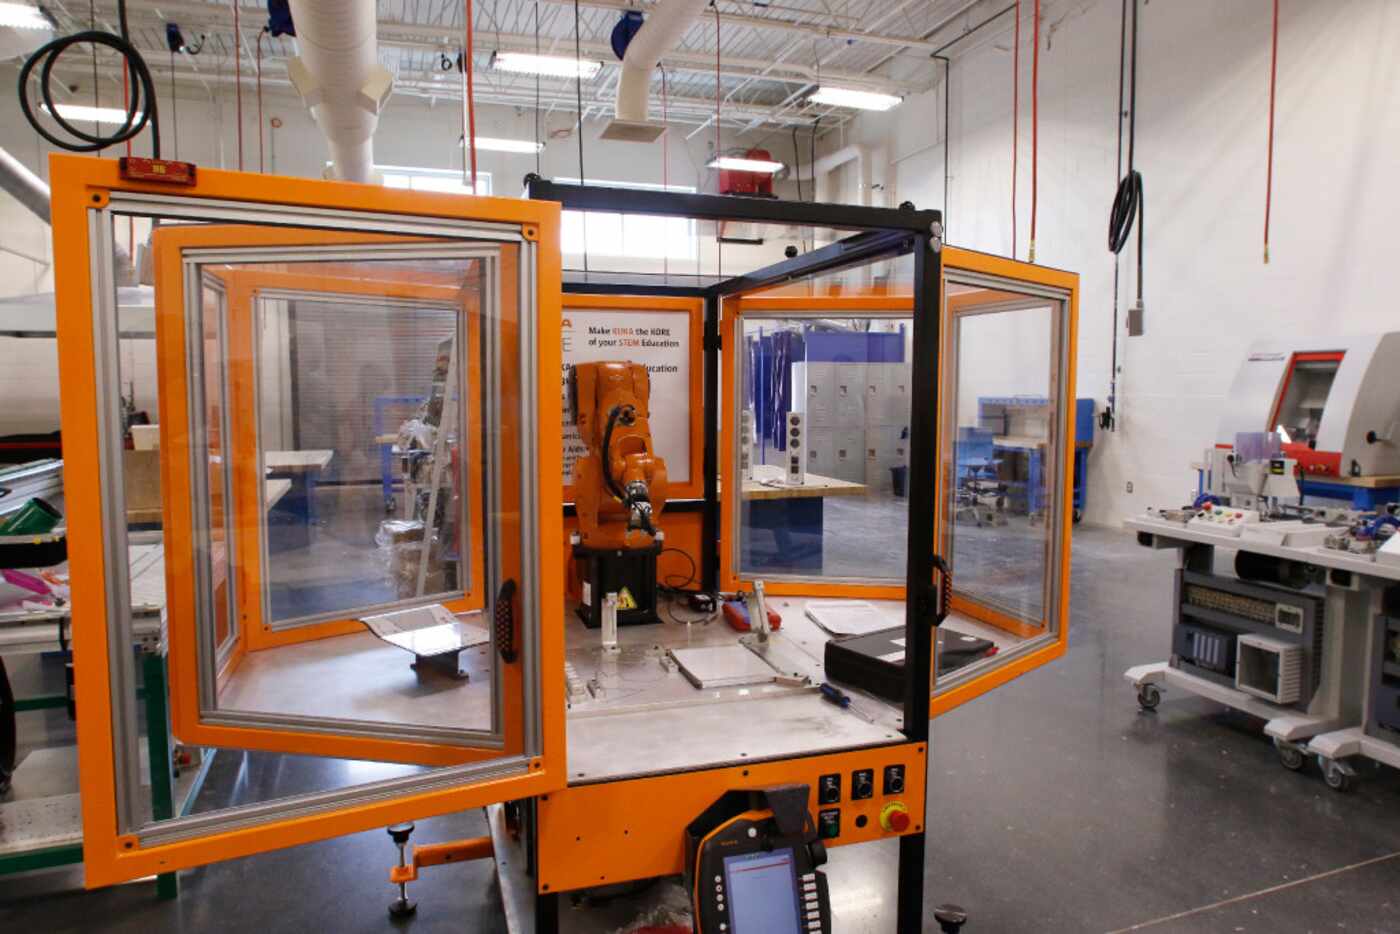 The manufacturing engineering lab is one of many high-tech classrooms at the Gilbreath-Reed...